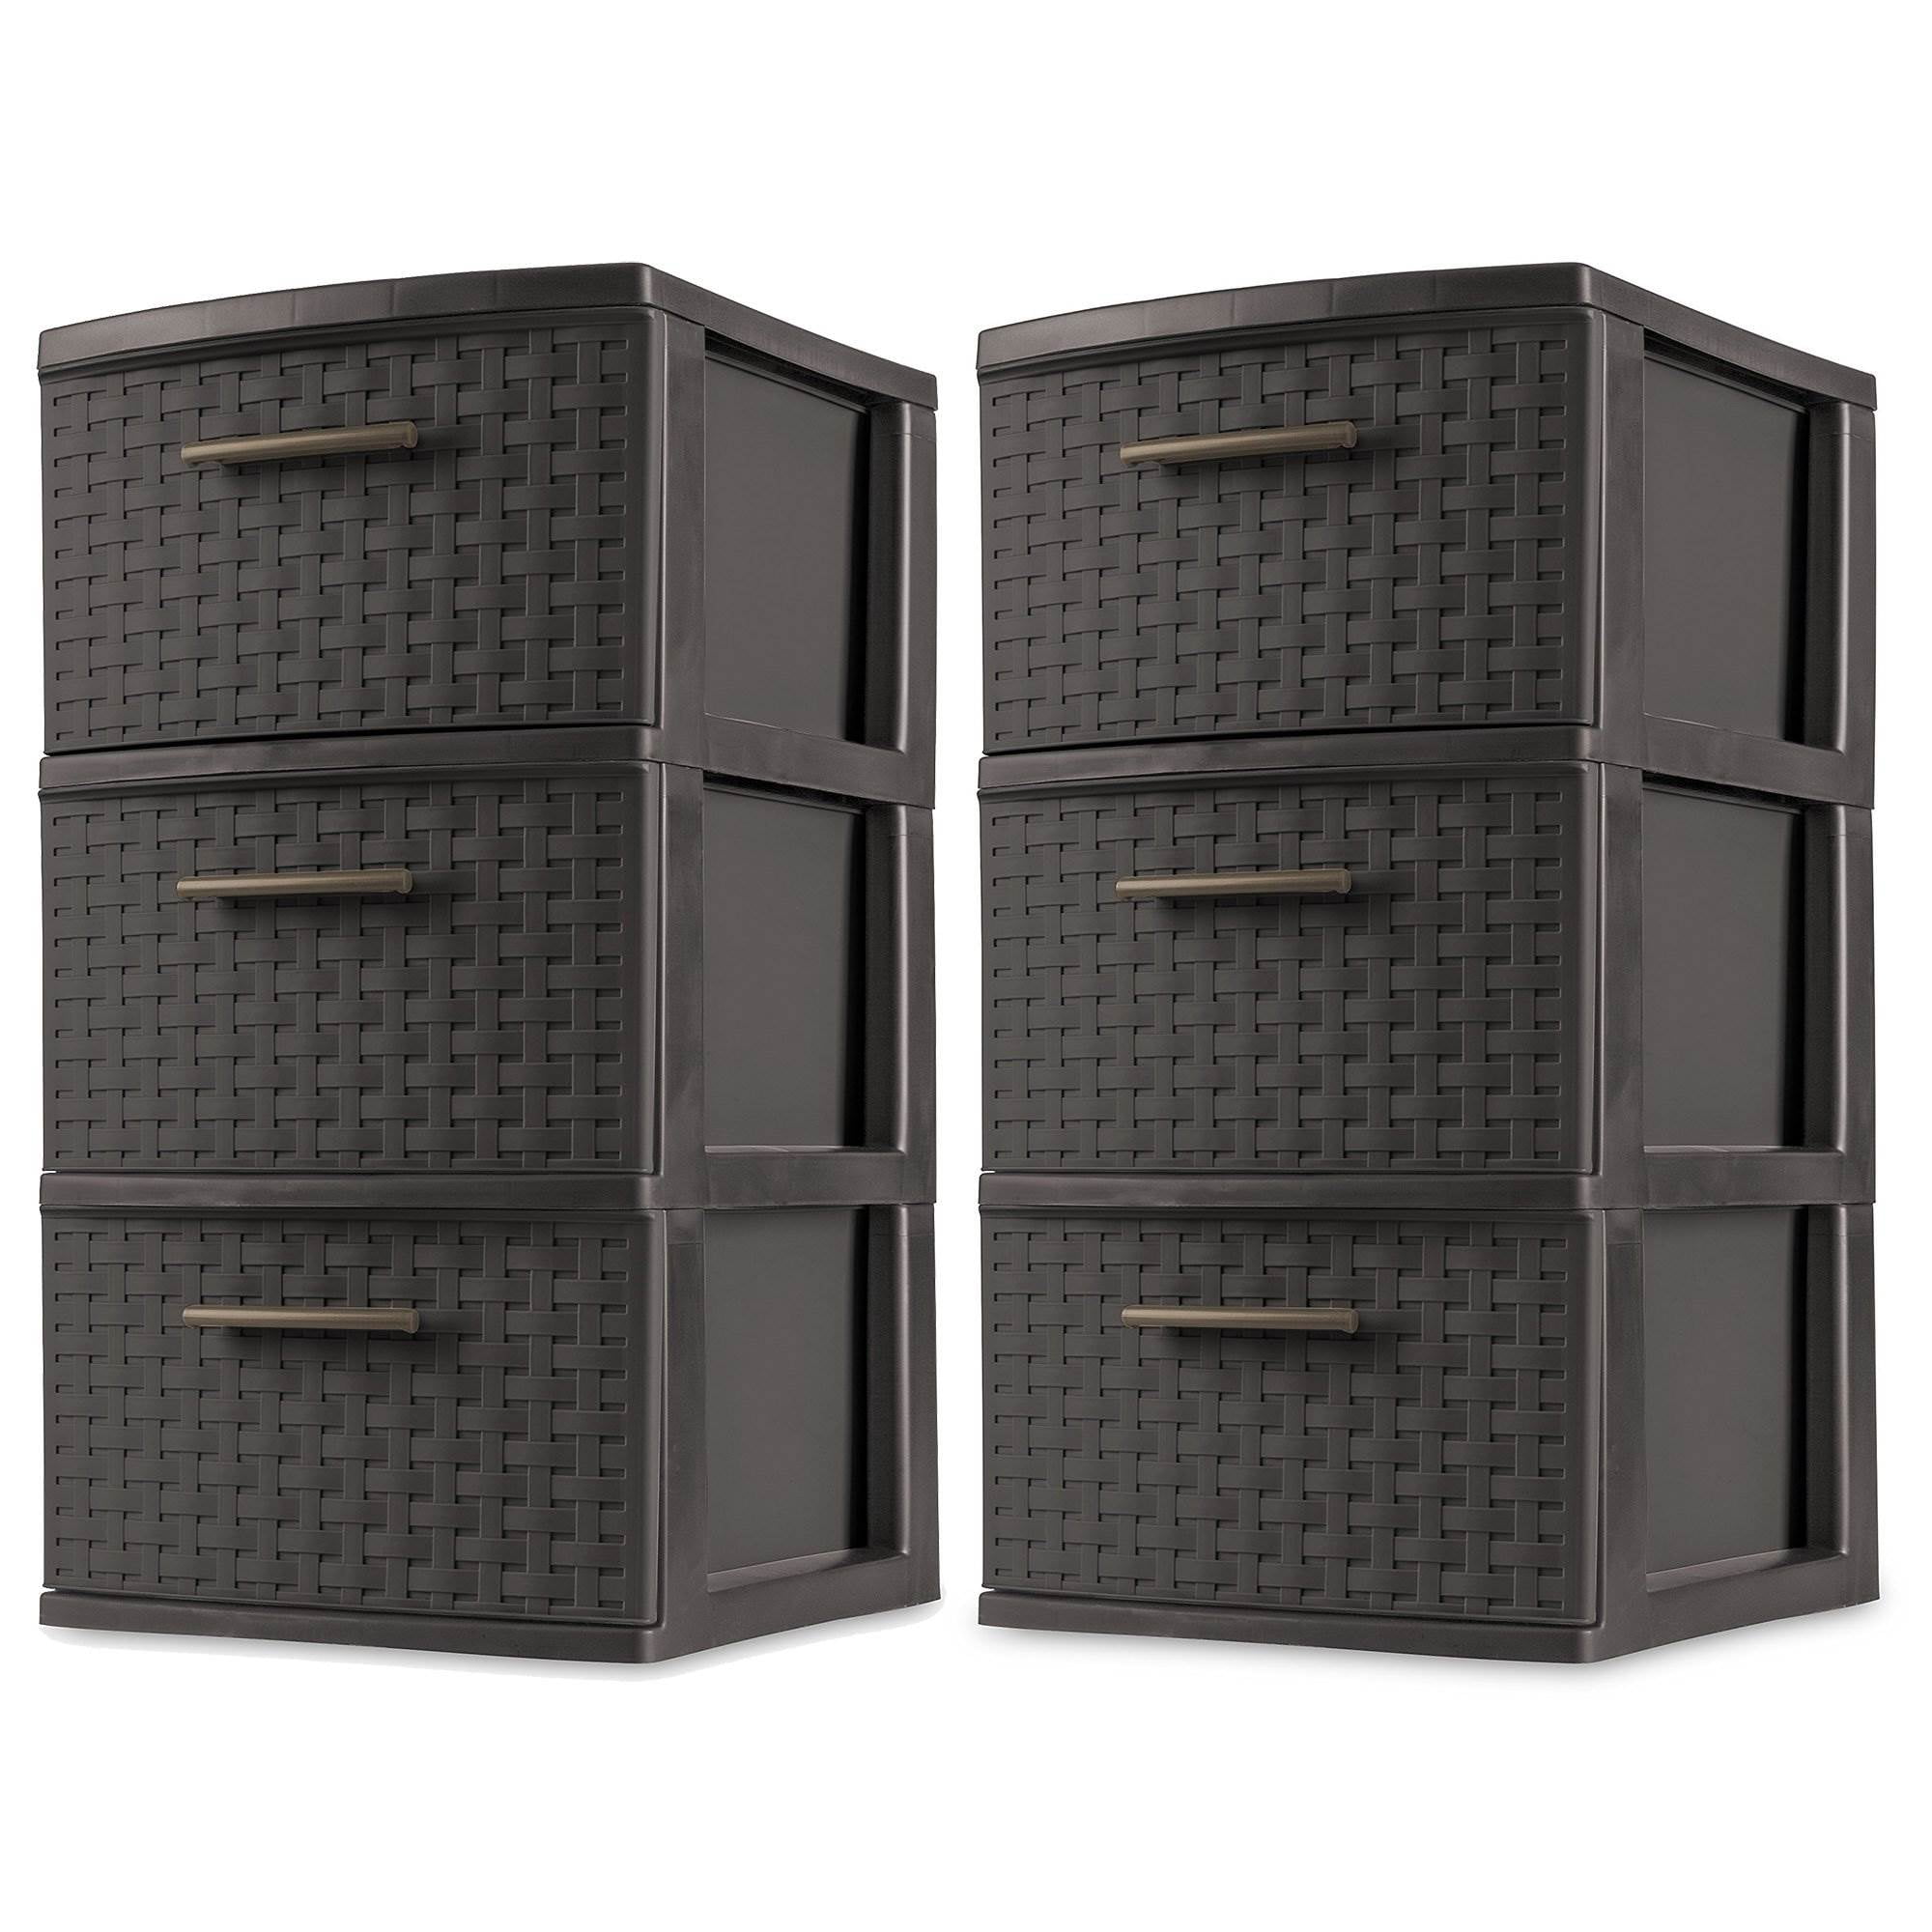 Details about   3 Drawer Weave Tower Case of 2 Cart Storage Cabinet Organizer Container Espresso 